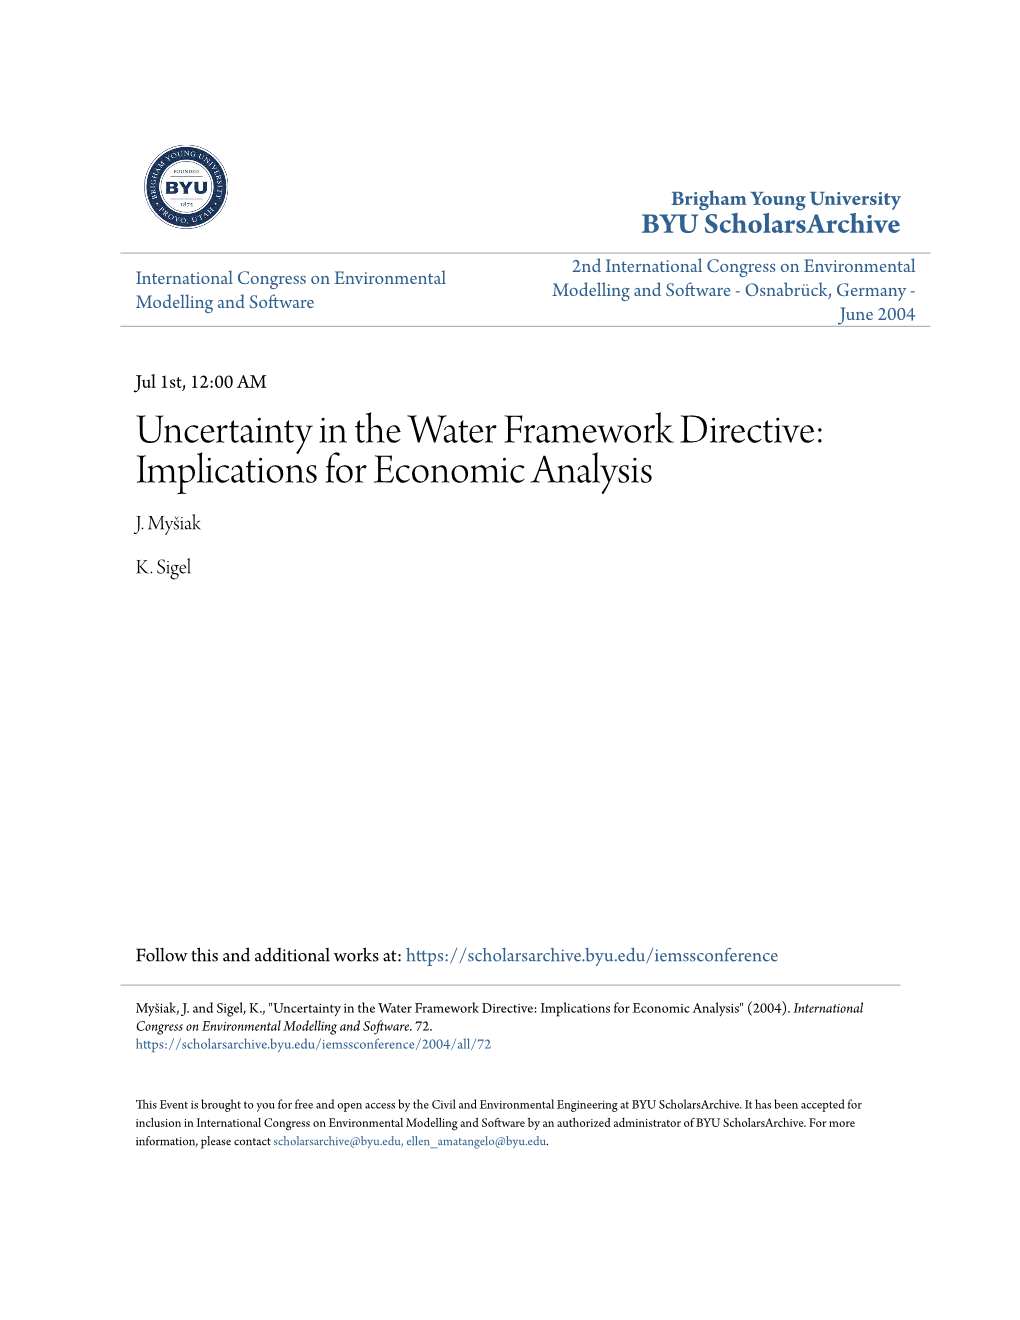 Uncertainty in the Water Framework Directive: Implications for Economic Analysis J